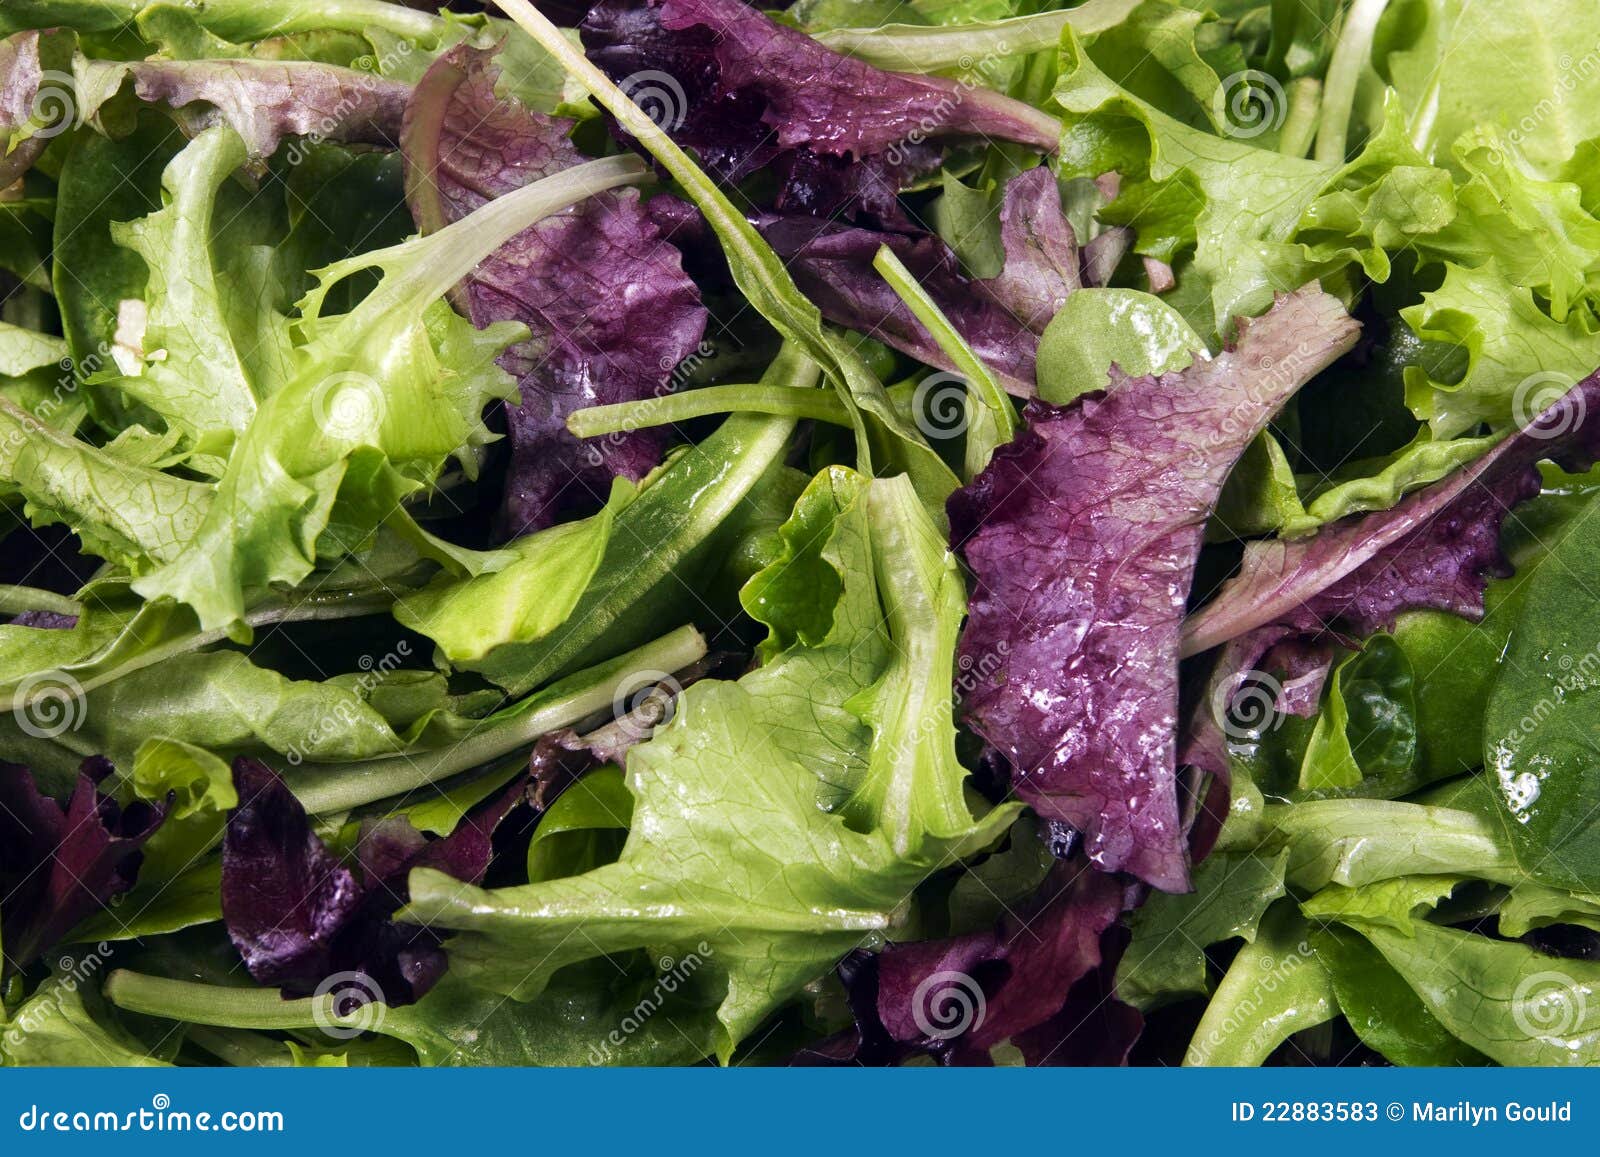 lettuce - mixed baby leaves